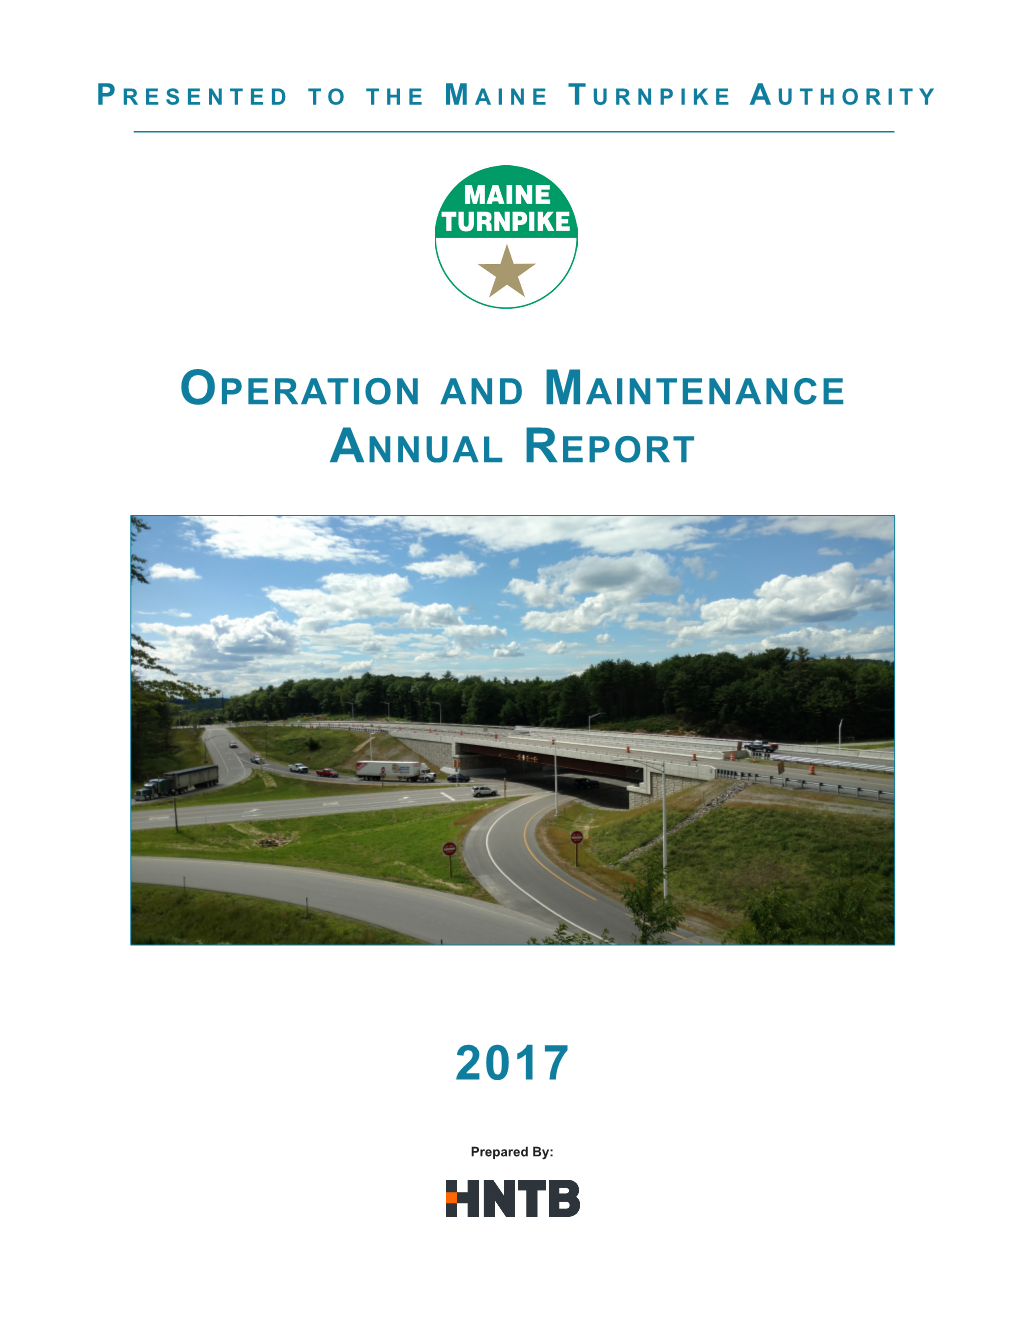 2017 Operation and Maintenance Annual Report for the Maine Turnpike